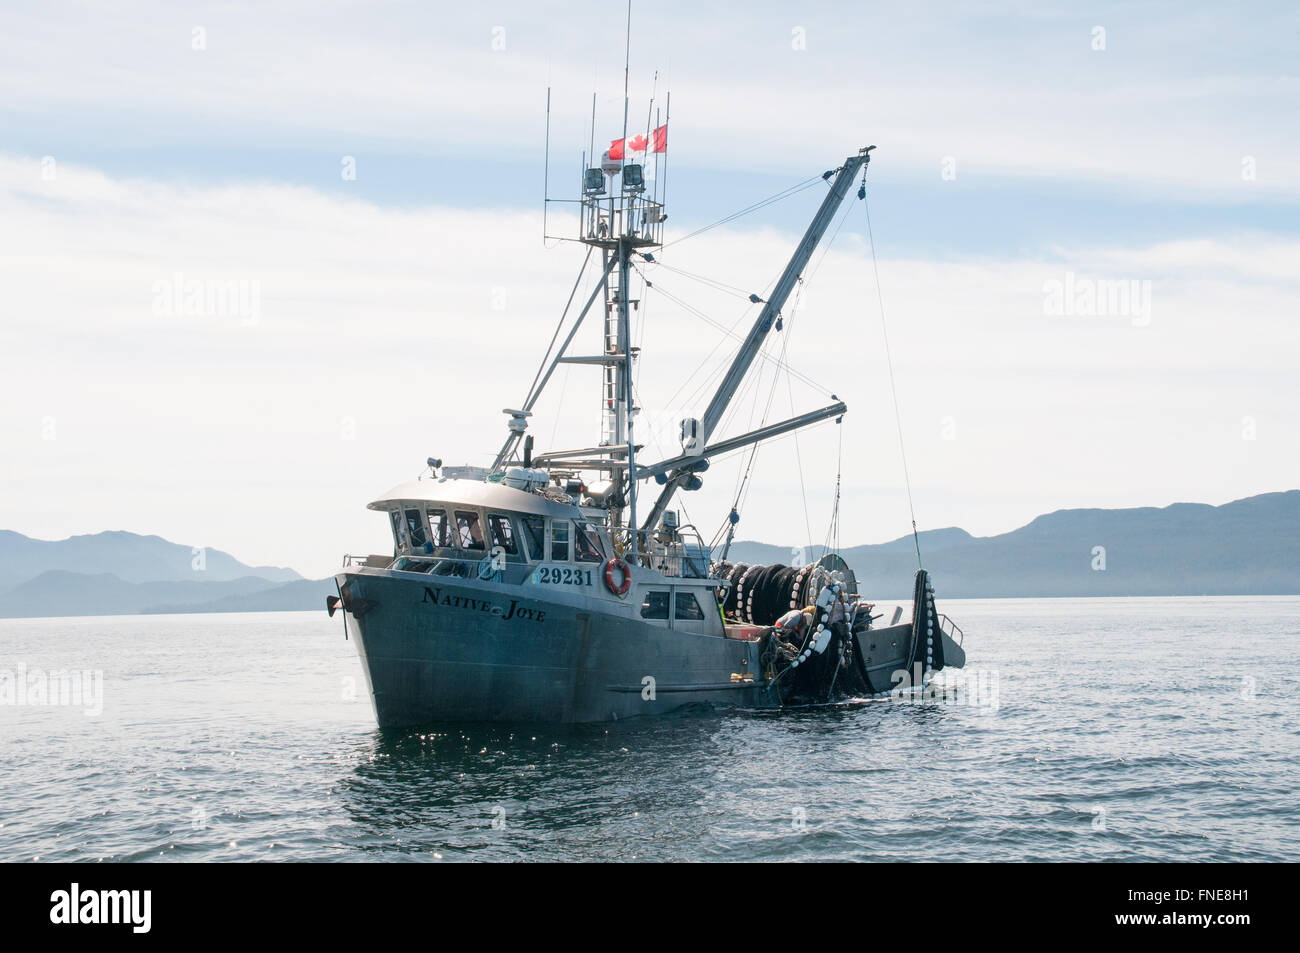 A wild salmon gillnet fishing boat in the Great Bear Rainforest region on the North Pacific coast of British Columbia, Canada. Stock Photo